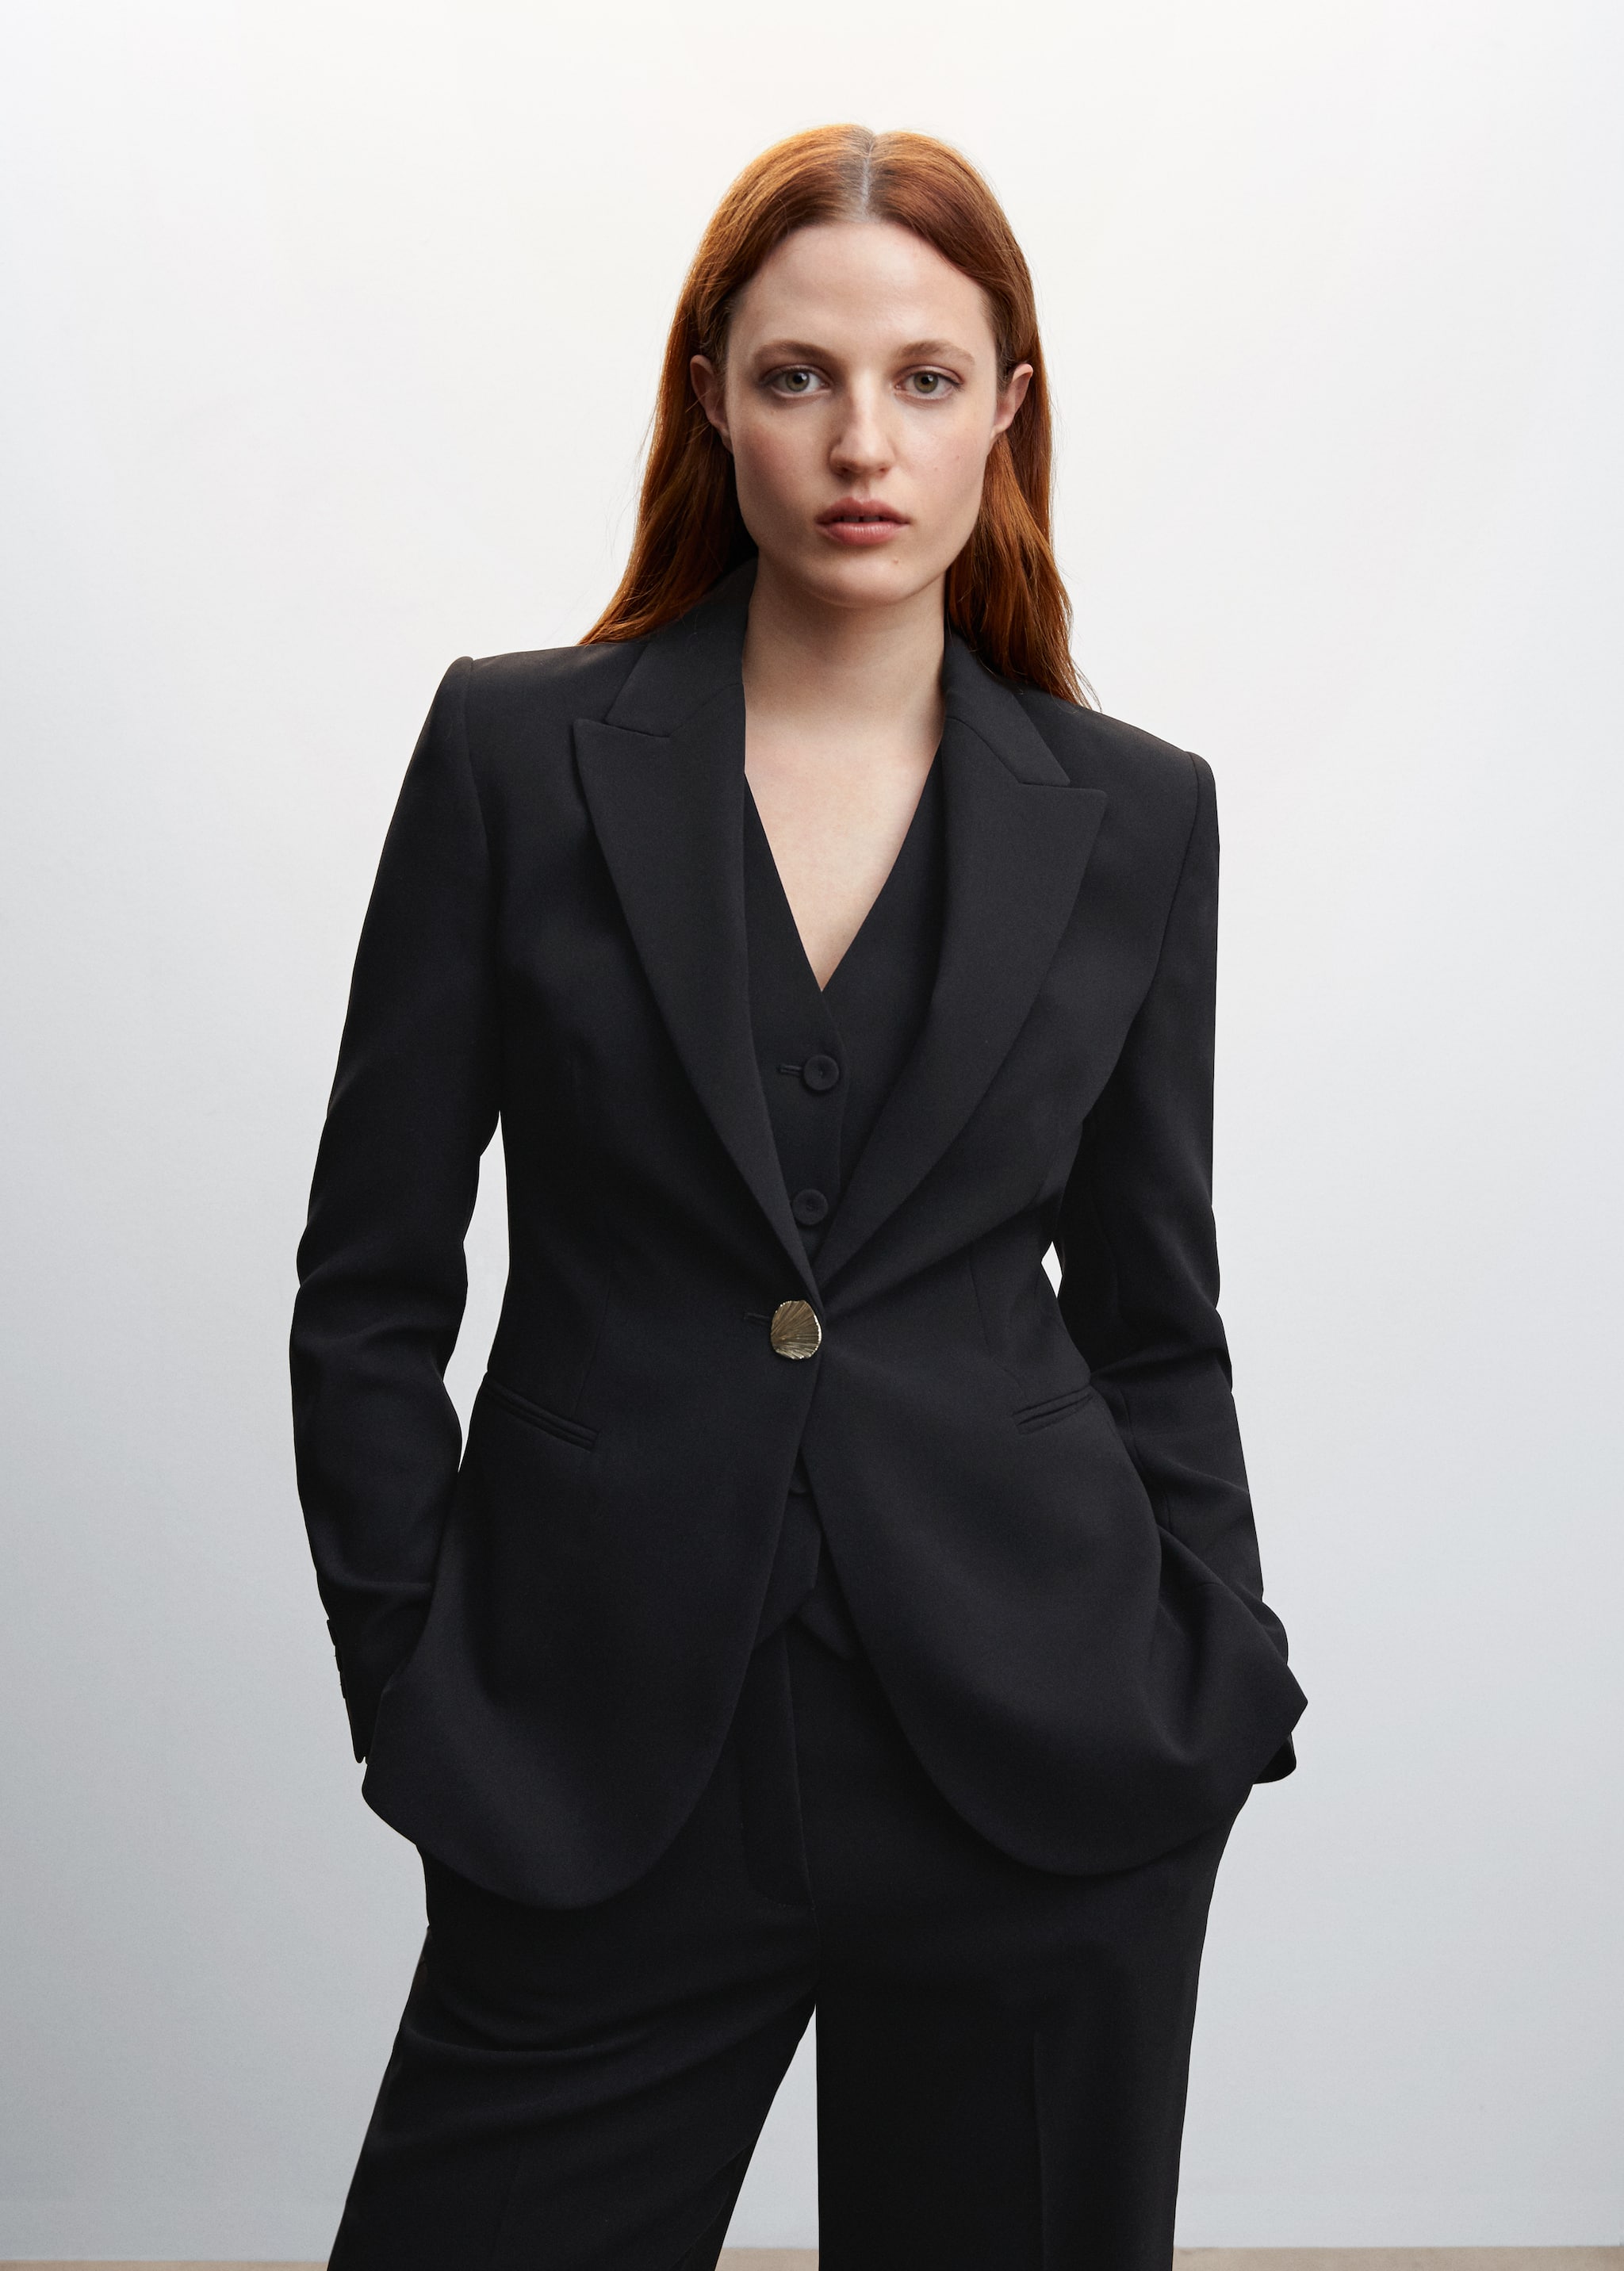 Suit jacket with buttons  - Medium plane